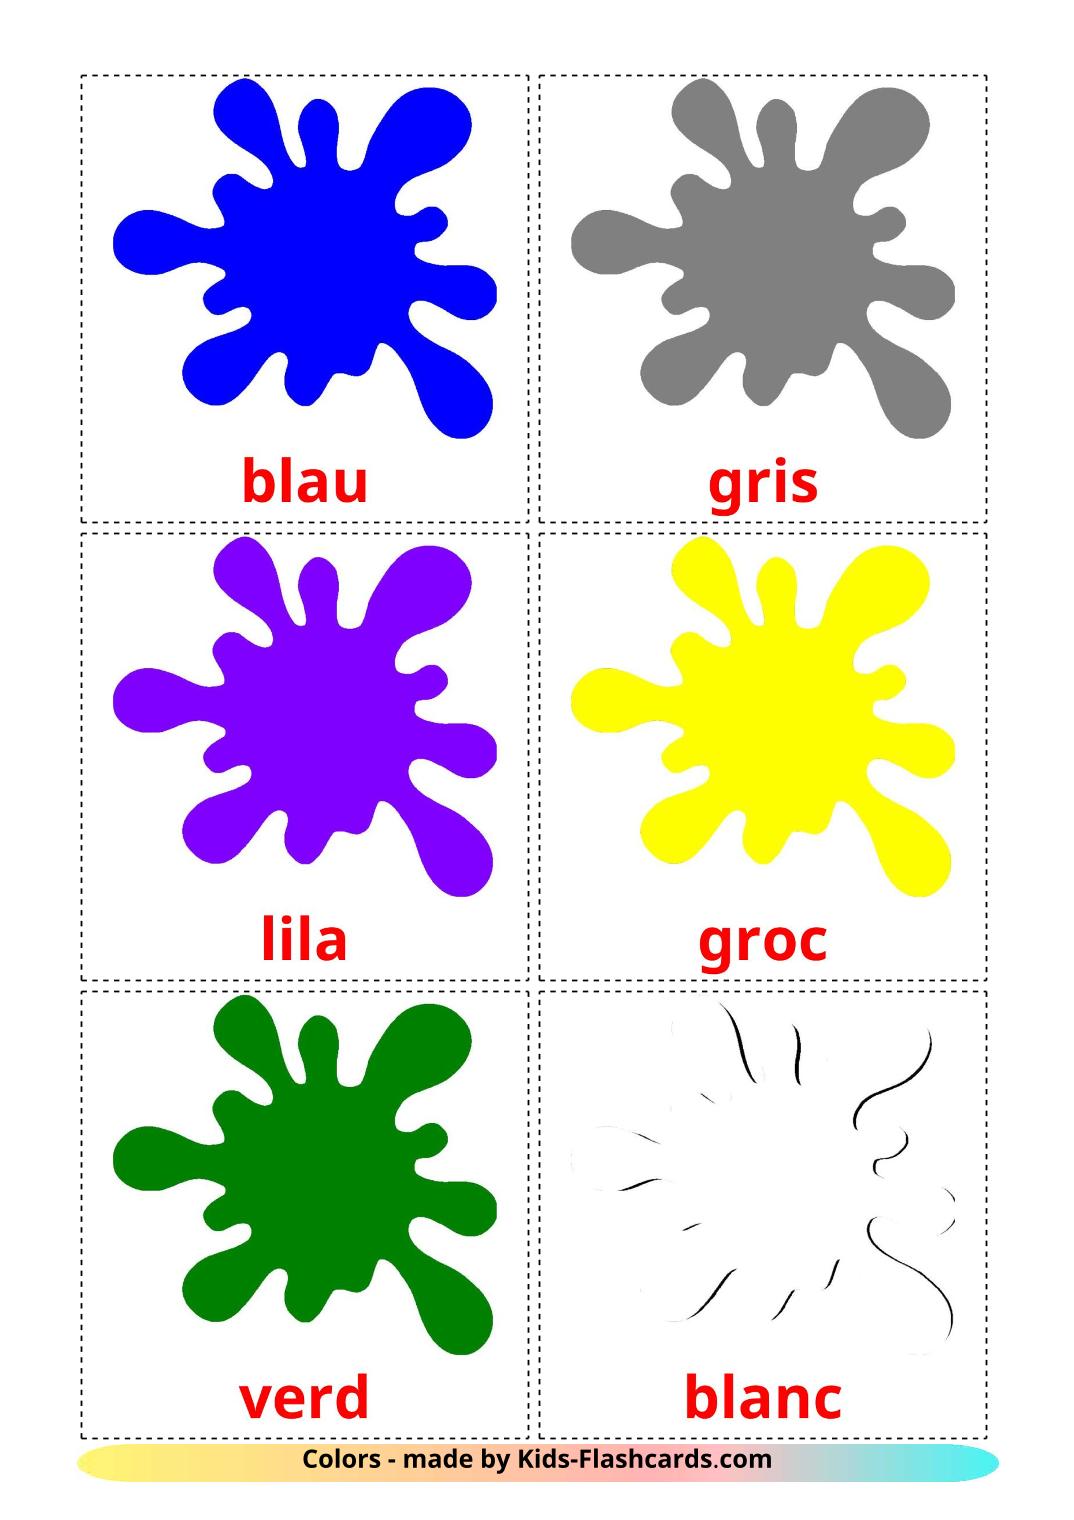 Base colors - 12 Free Printable catalan Flashcards 